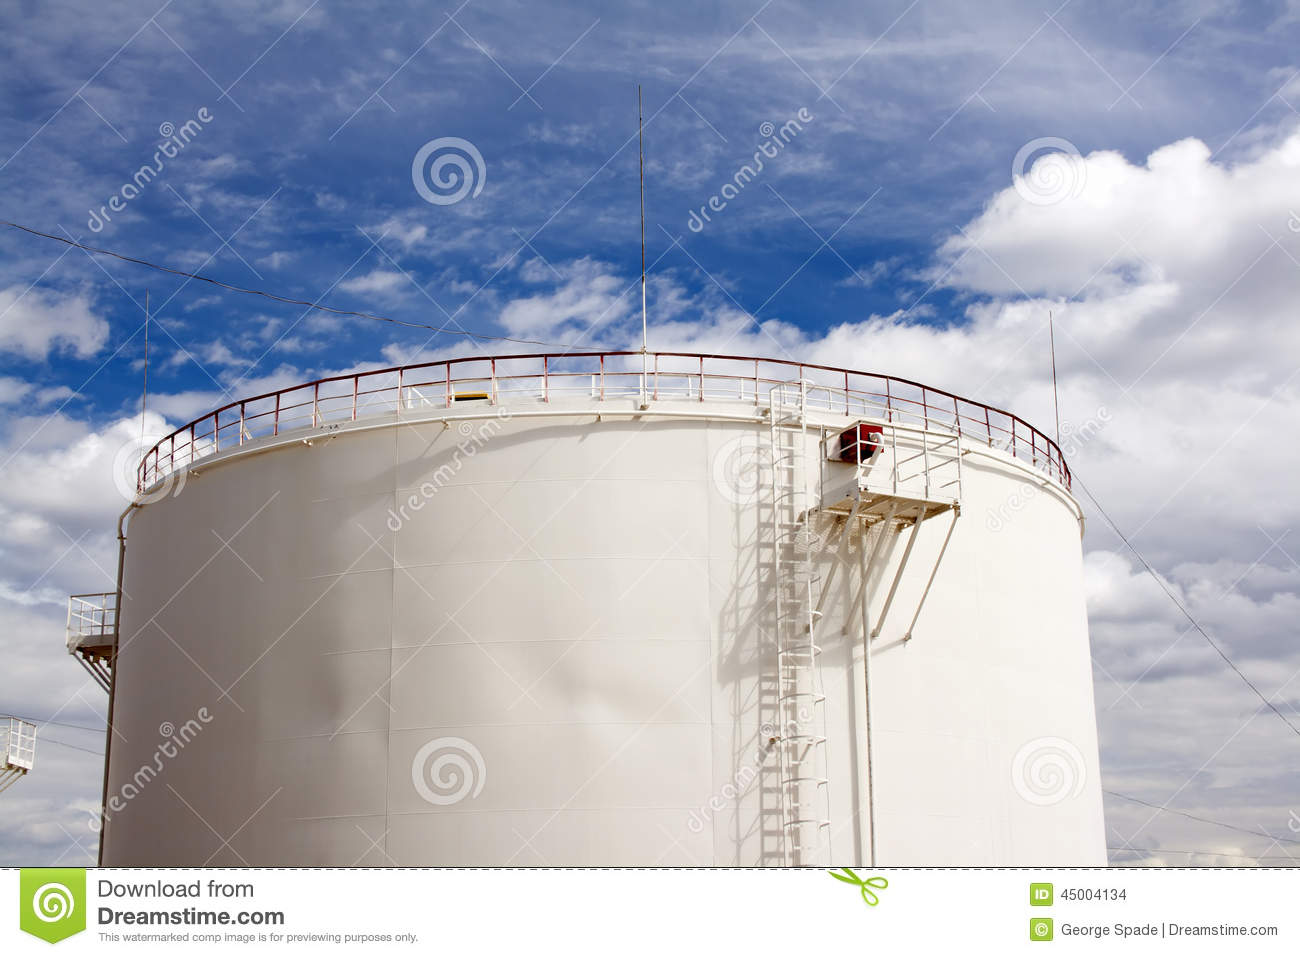 Oil Reservoir And Blue Sky With Clouds  Oil Industry And Gas Refinery